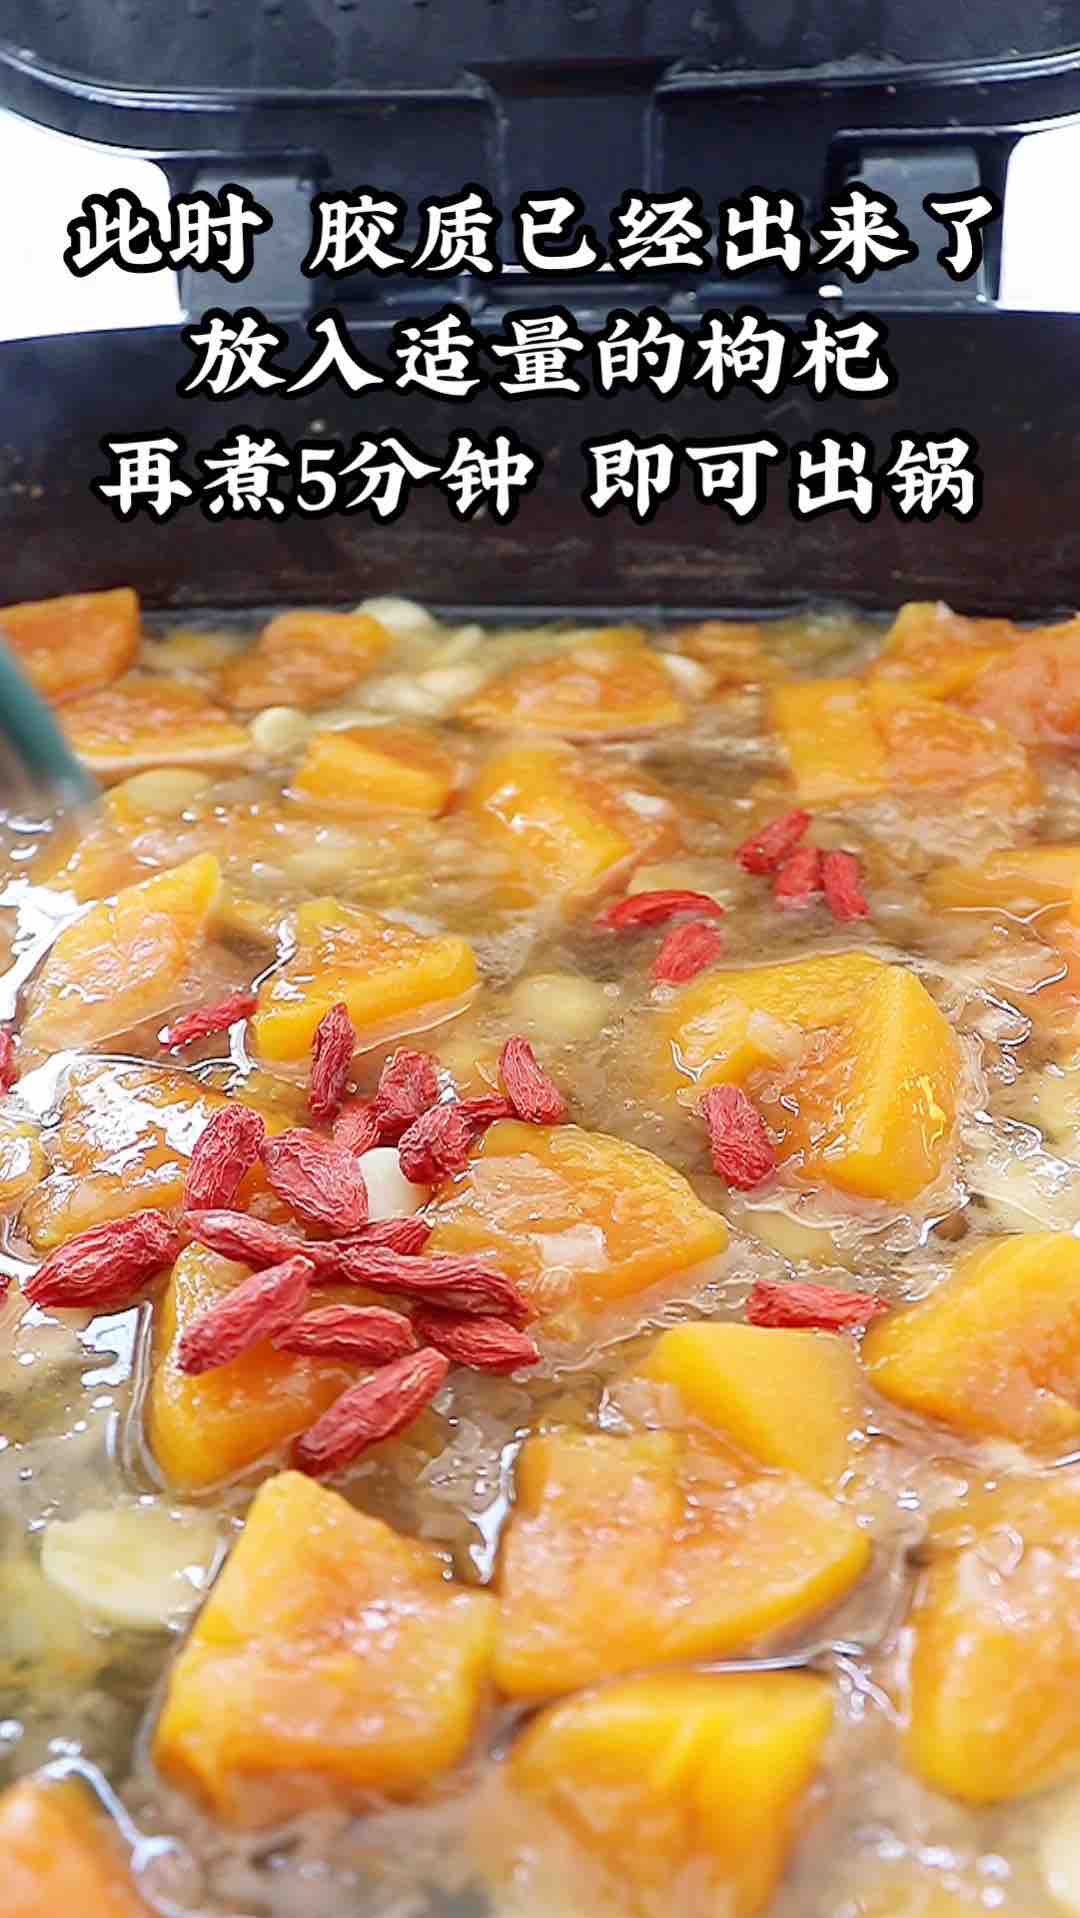 Papaya and Lotus Seed Golden Swallow Ear and White Fungus Soup recipe